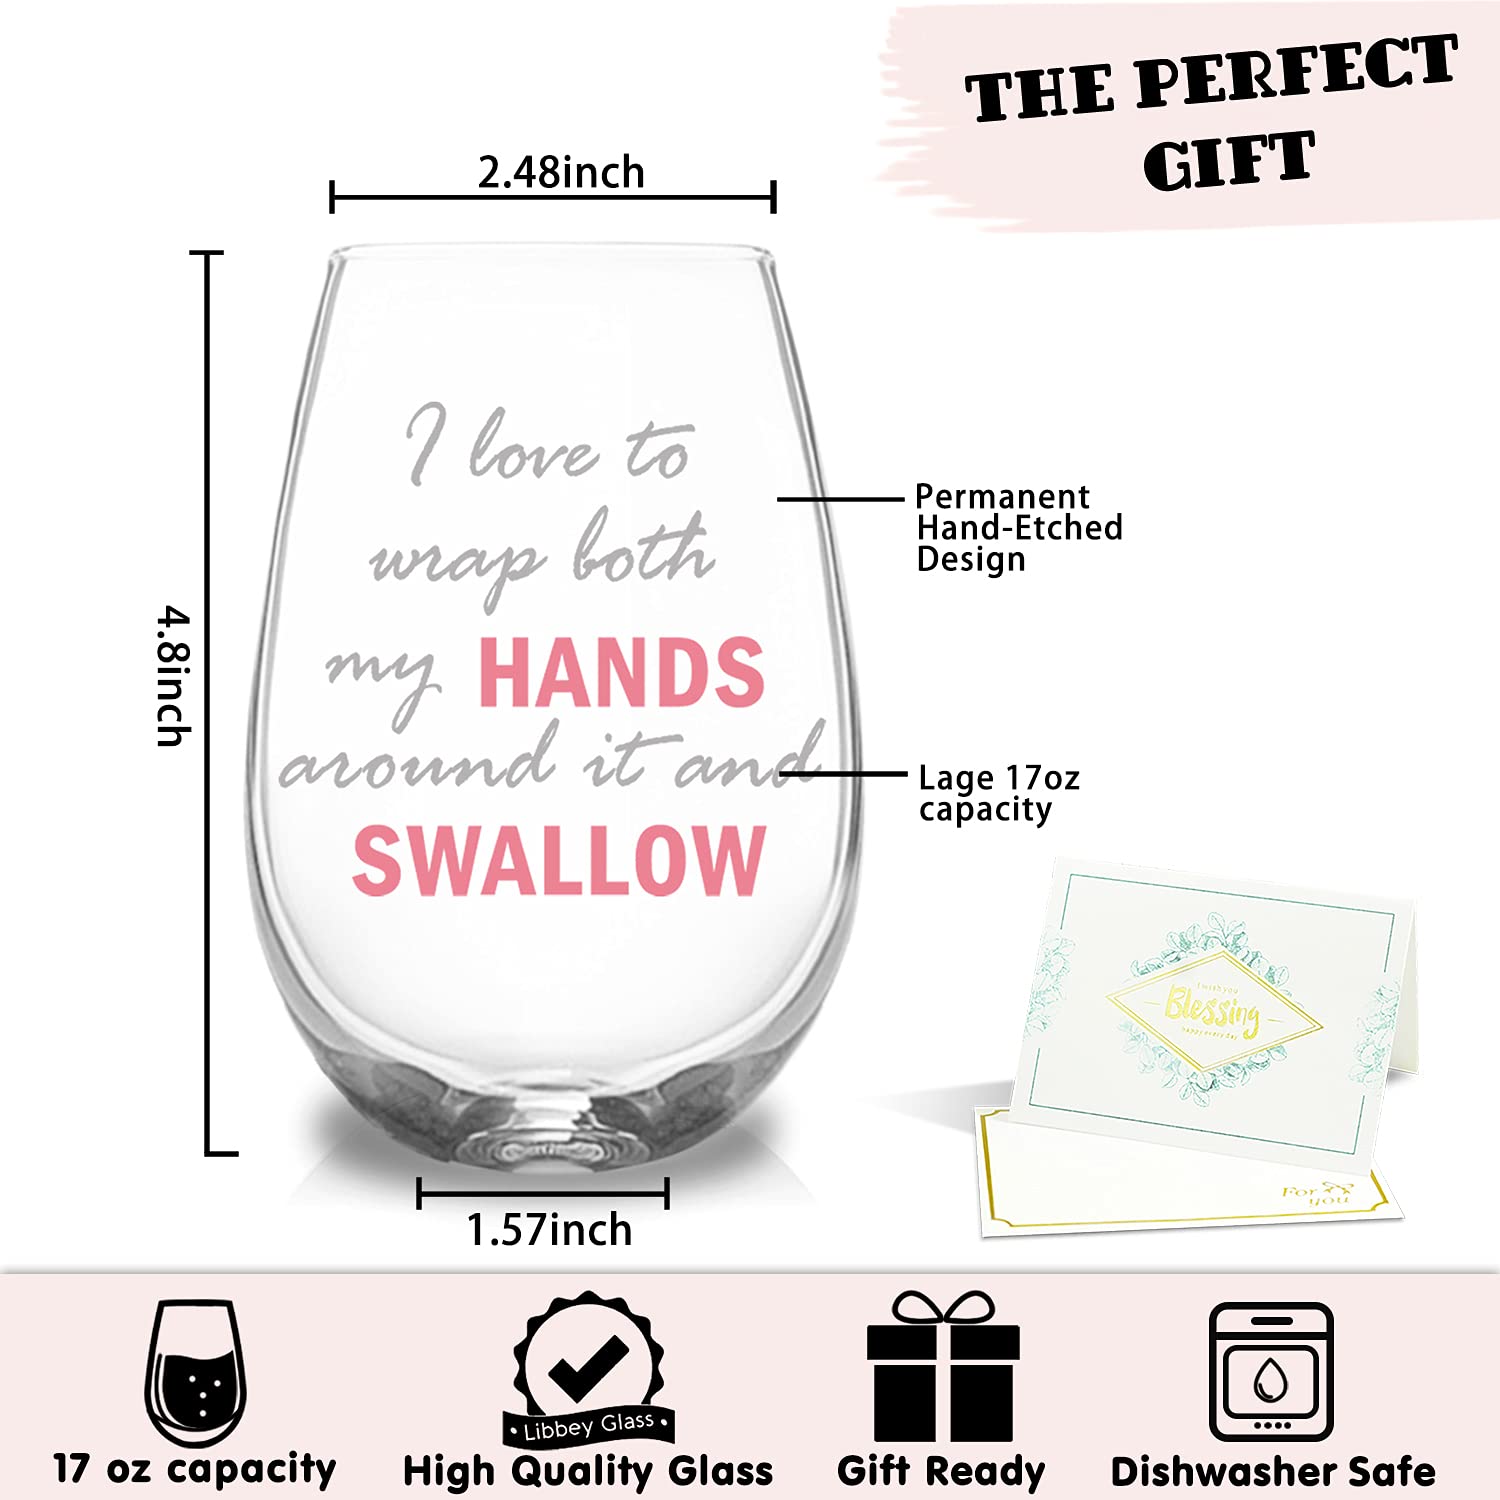 Mokoart I Love to Wrap Both My HANDS Around It and SWALLOW Funny Wine Glass for Women, Gag Gifts for Adults, Friends, Her, BBF for Bachelorette Parties Decorations, Birthday Gift Idea for Her, 17 oz